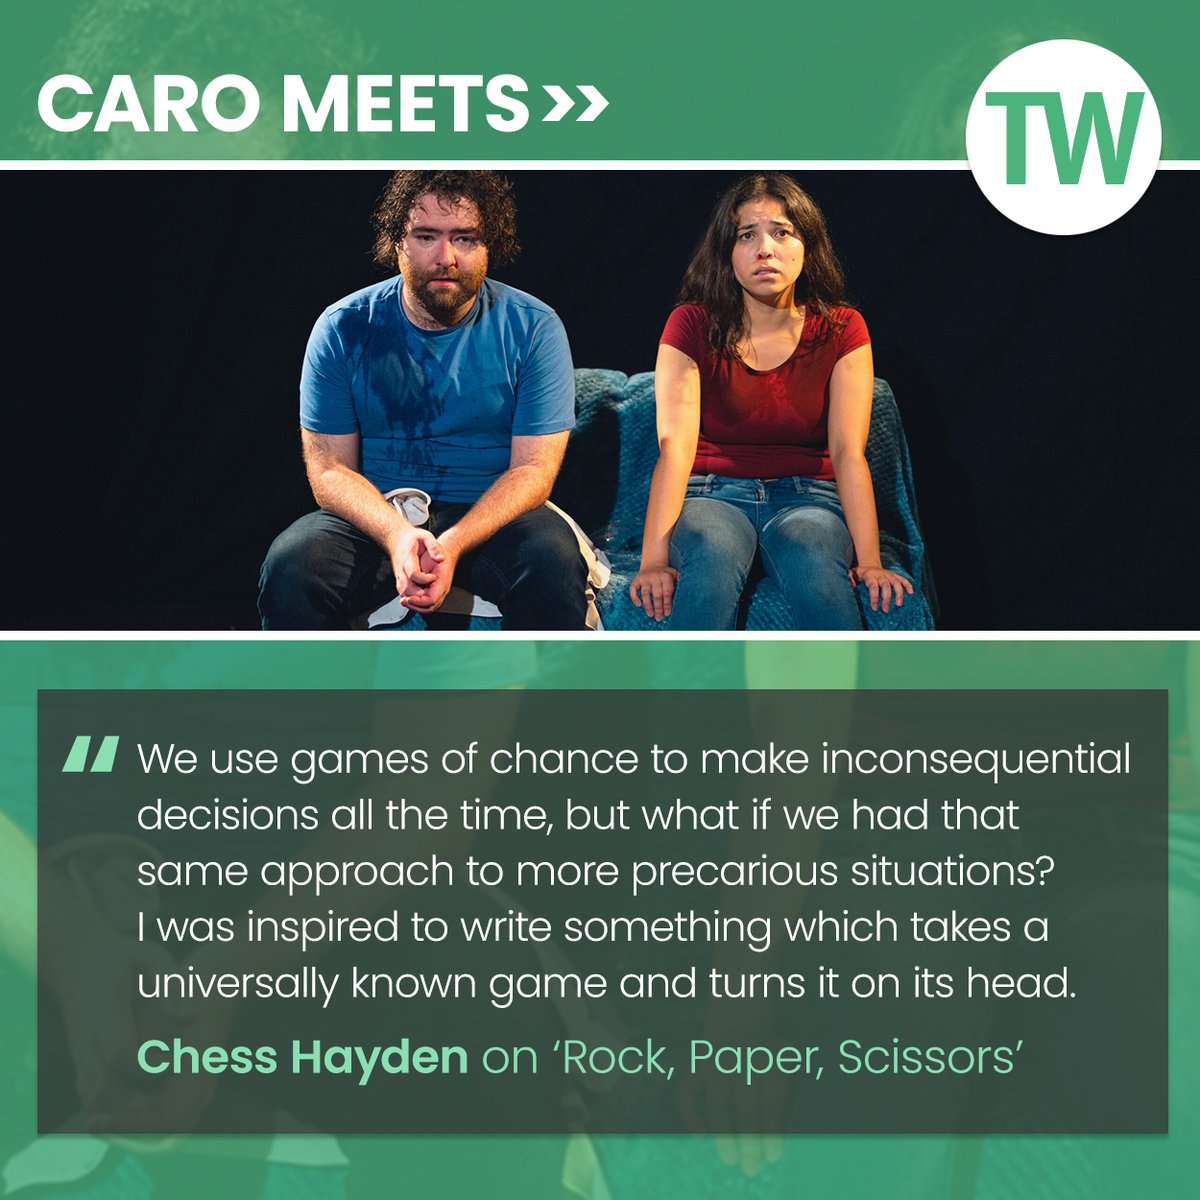 This week Caro Meets Chess Hayden to discuss her show 'Rock, Paper, Scissors' at The Hope Theatre from 7-11 May: bit.ly/3wlmUv2 @TheHopeTheatre @FrecklesFaced